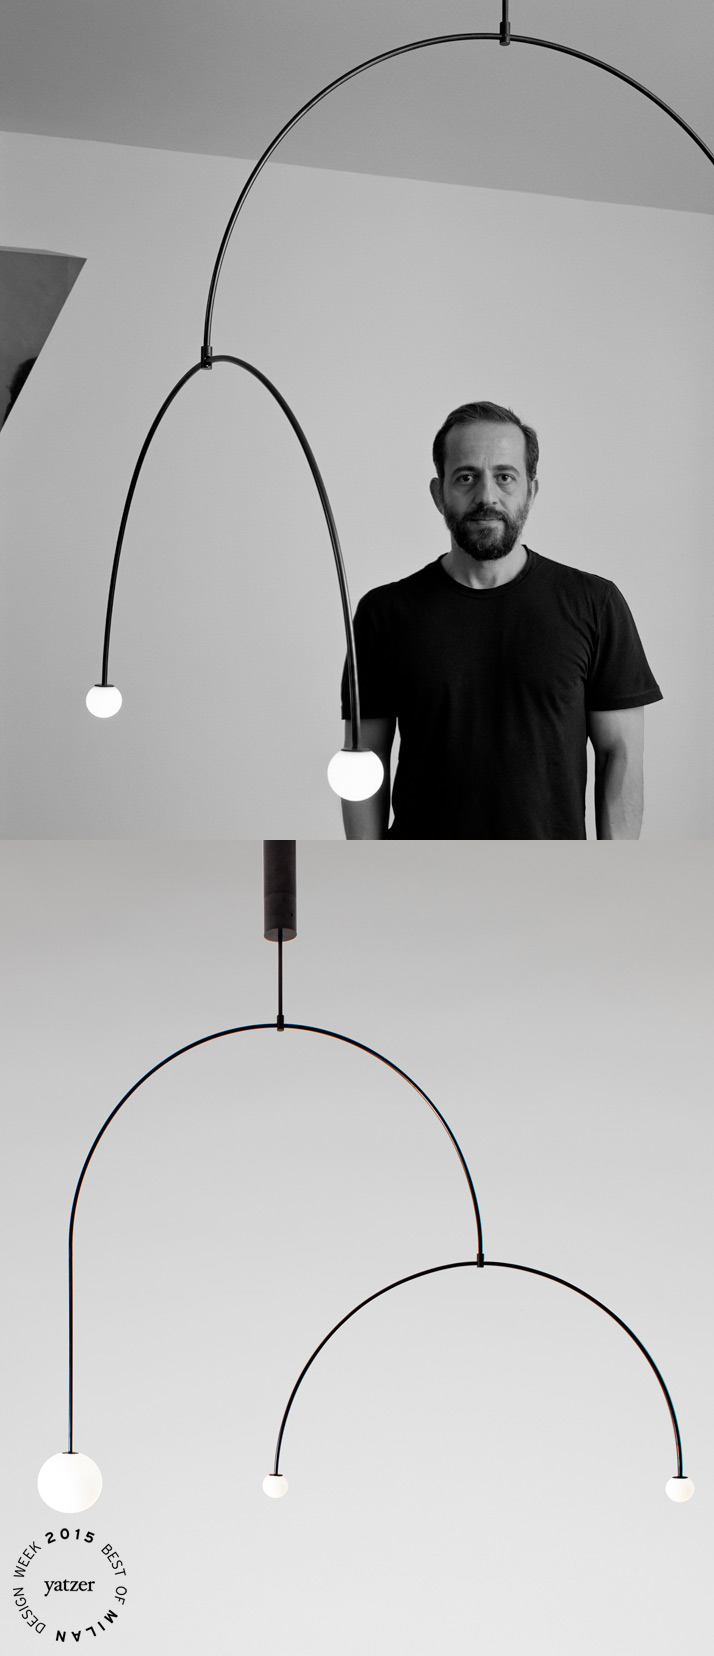 Mobile Chandelier 9 is one of the 15 new lighting designs that Michael Anastassiades launched in Milan this year, extending the collection of minimal mobile chandeliers and spherical lamps produced by his own brand.Photographs by Hélène Binet.